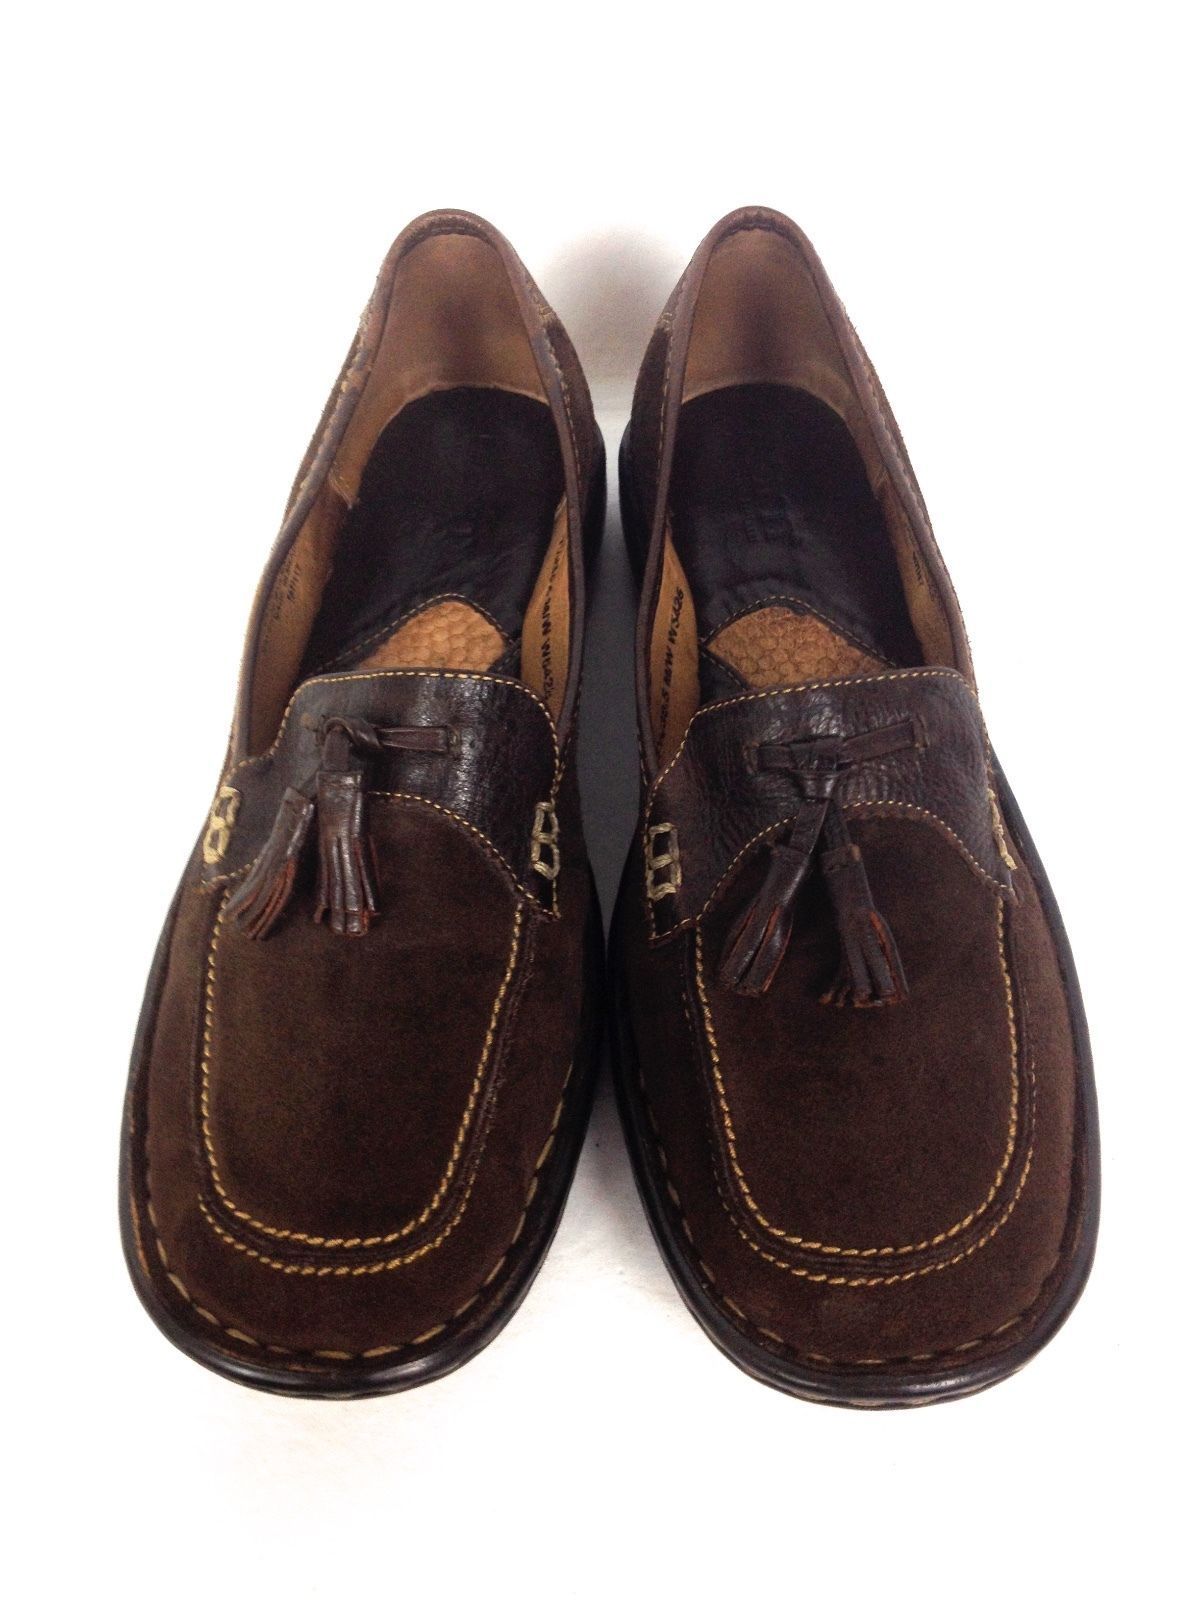 Born Shoes 7.5 Womens Brown Leather Loafers For Sale - Item #1474120